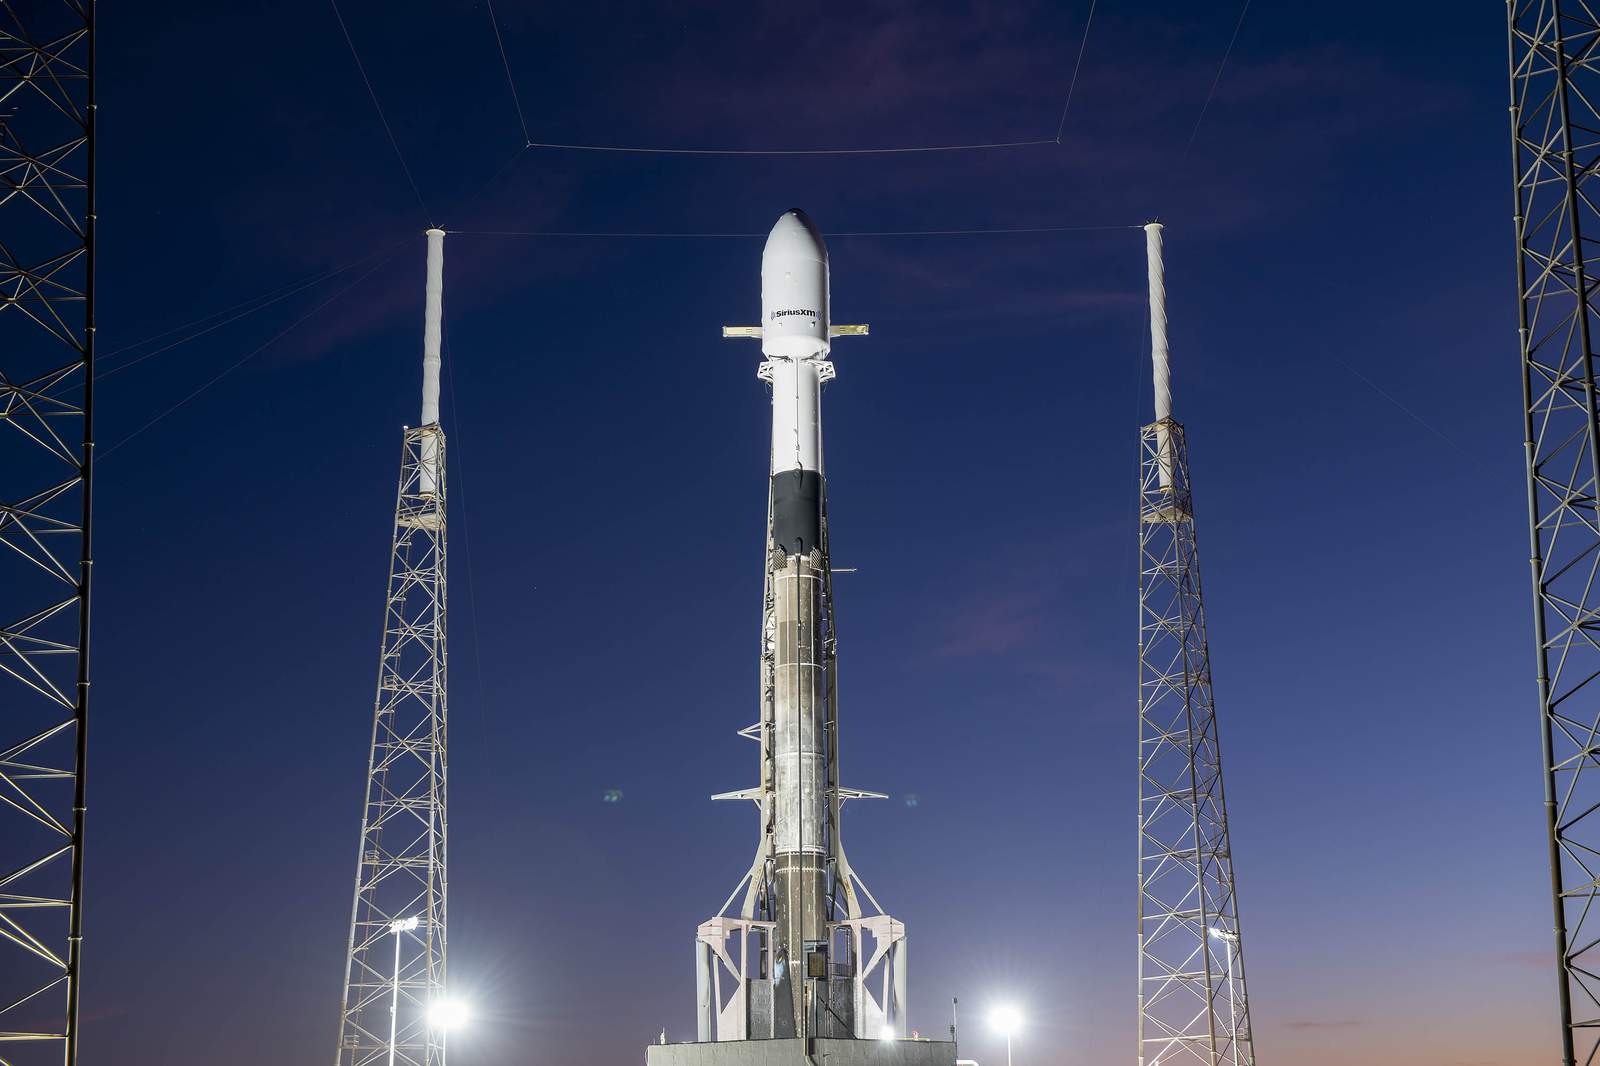 Last Space SpaceX rocket launch in 2020 to deliver sonic booms to Central Florida

